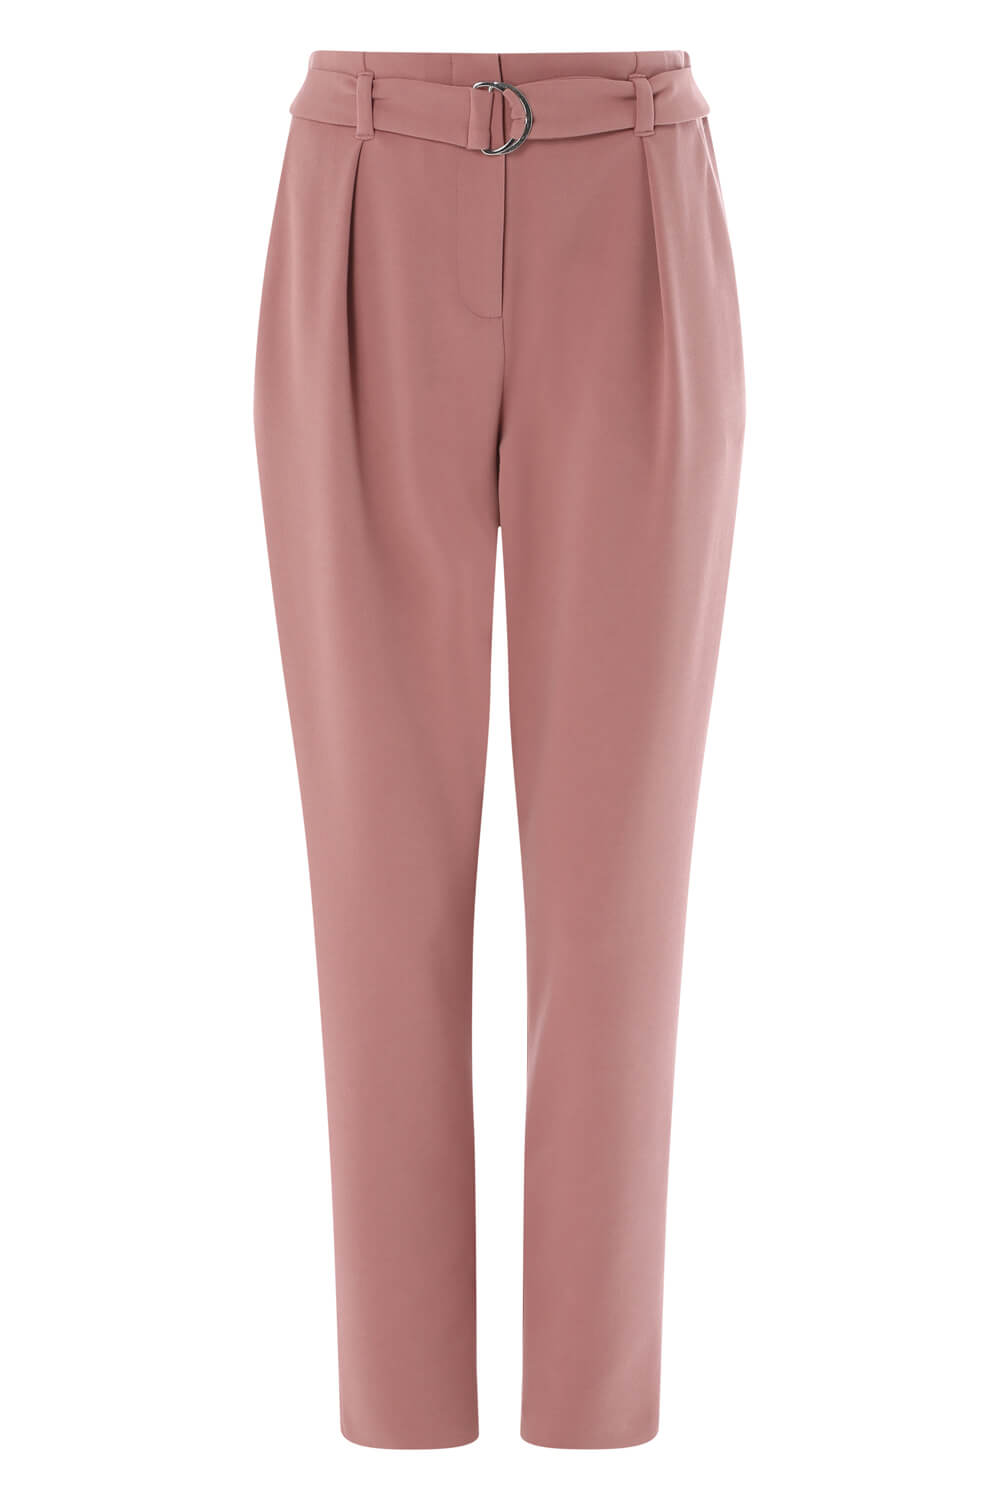 PINK Belted Tailored Trousers , Image 5 of 5